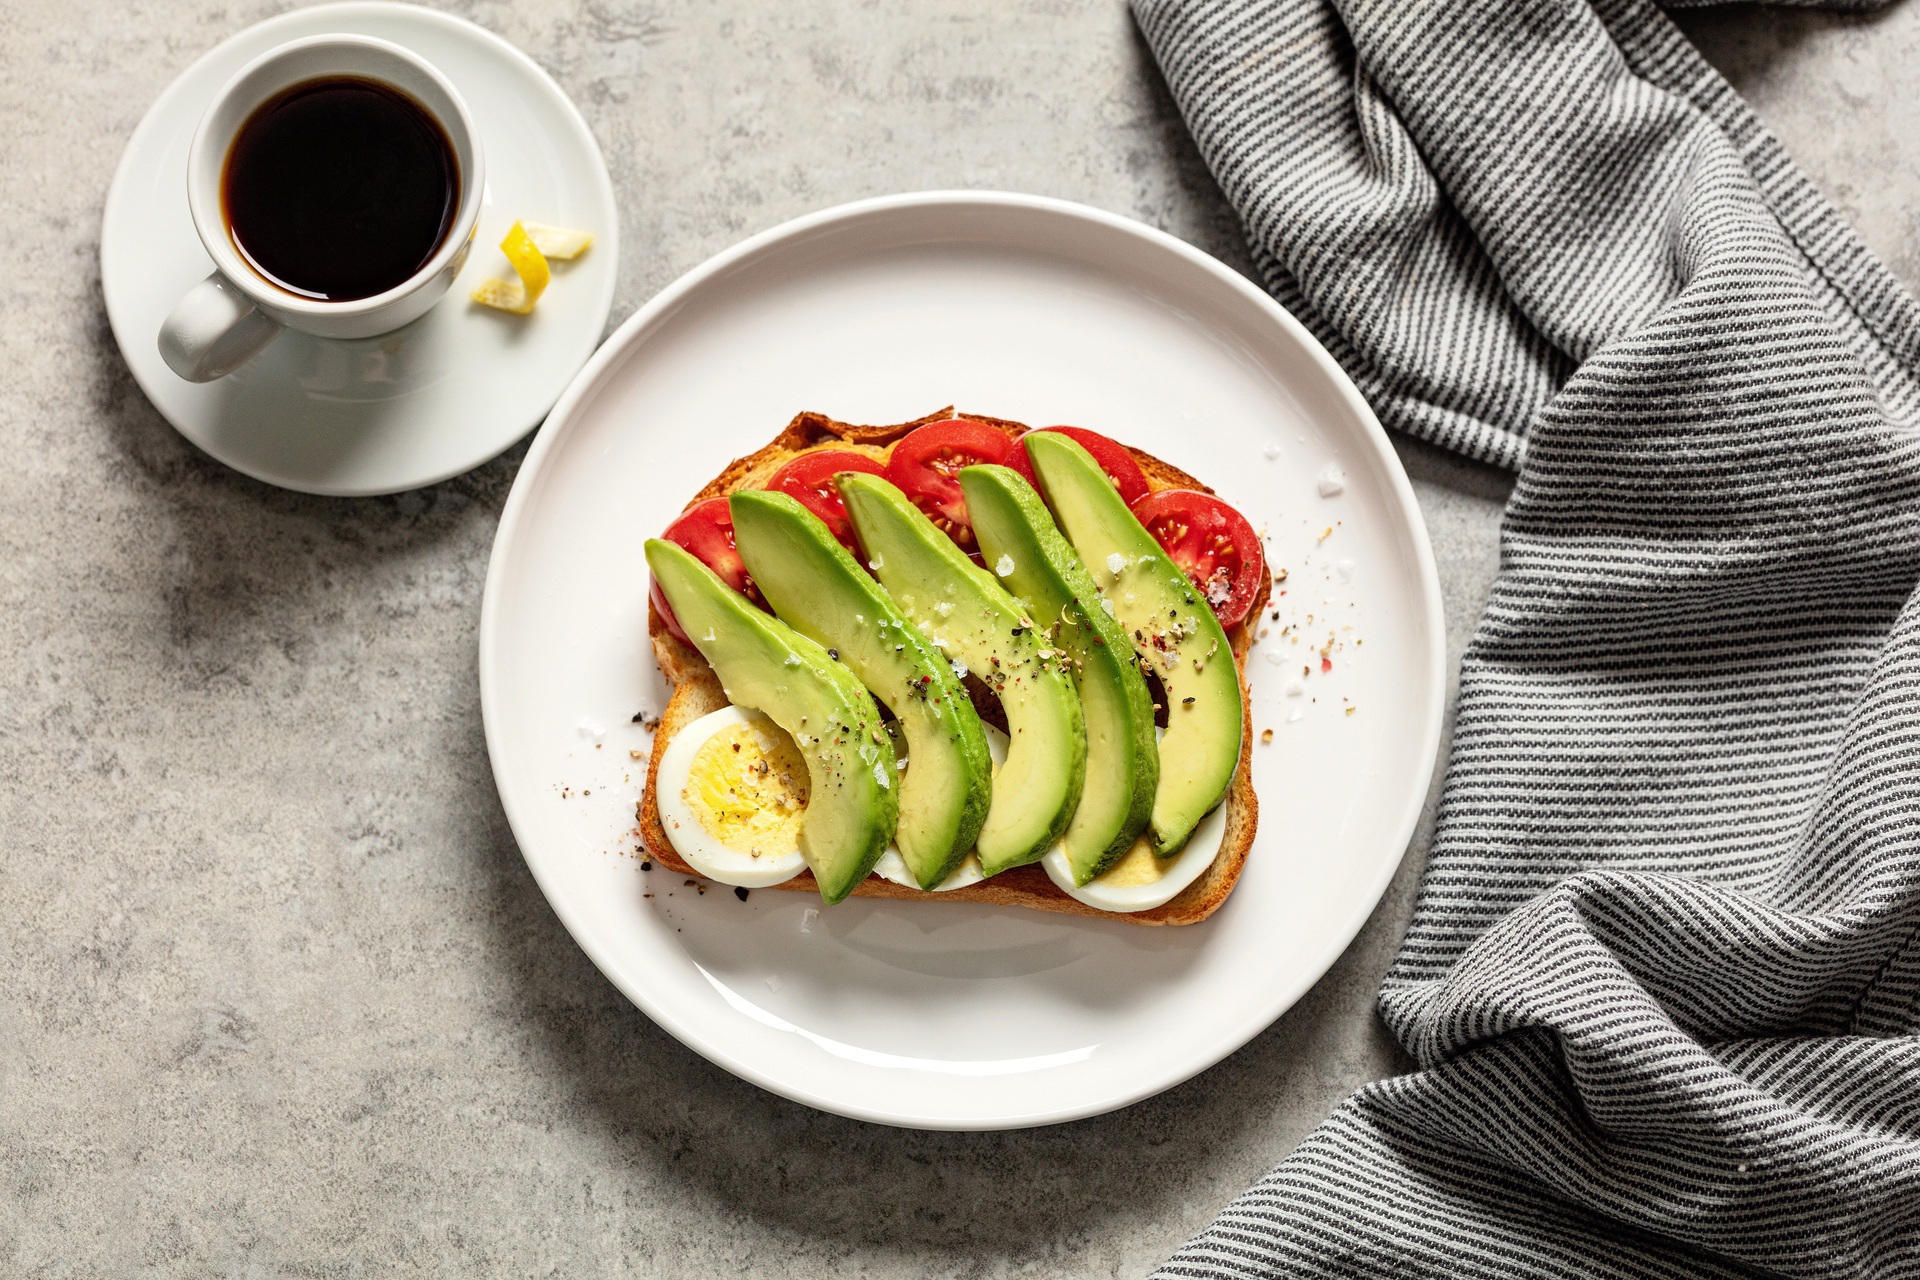 Avocado, tomato, and egg sliced on piece of toast; cup of coffee next to plate